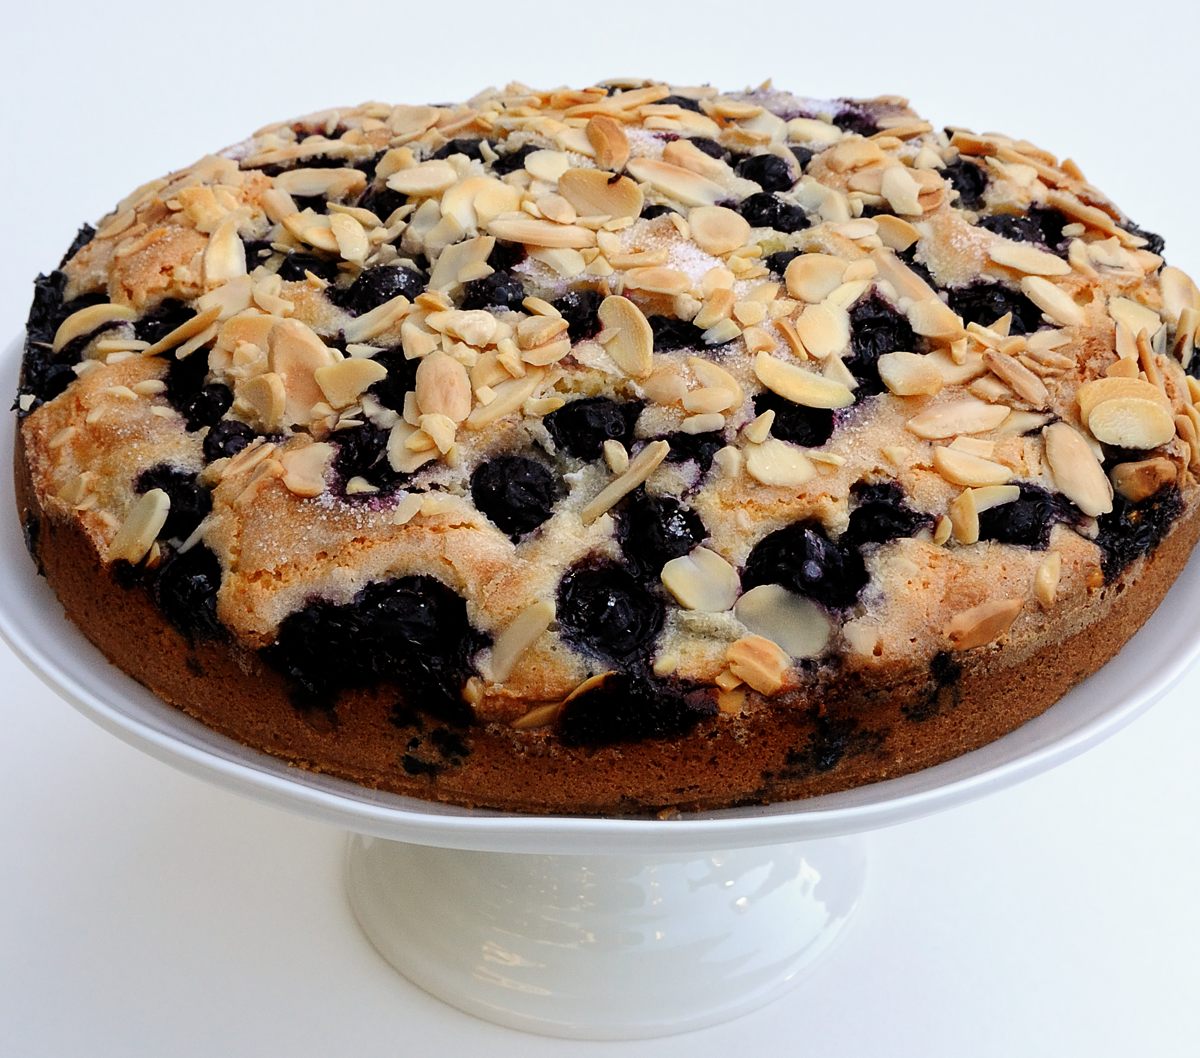 Fresh Blueberry Cake with Almonds, Conran Cake Stand